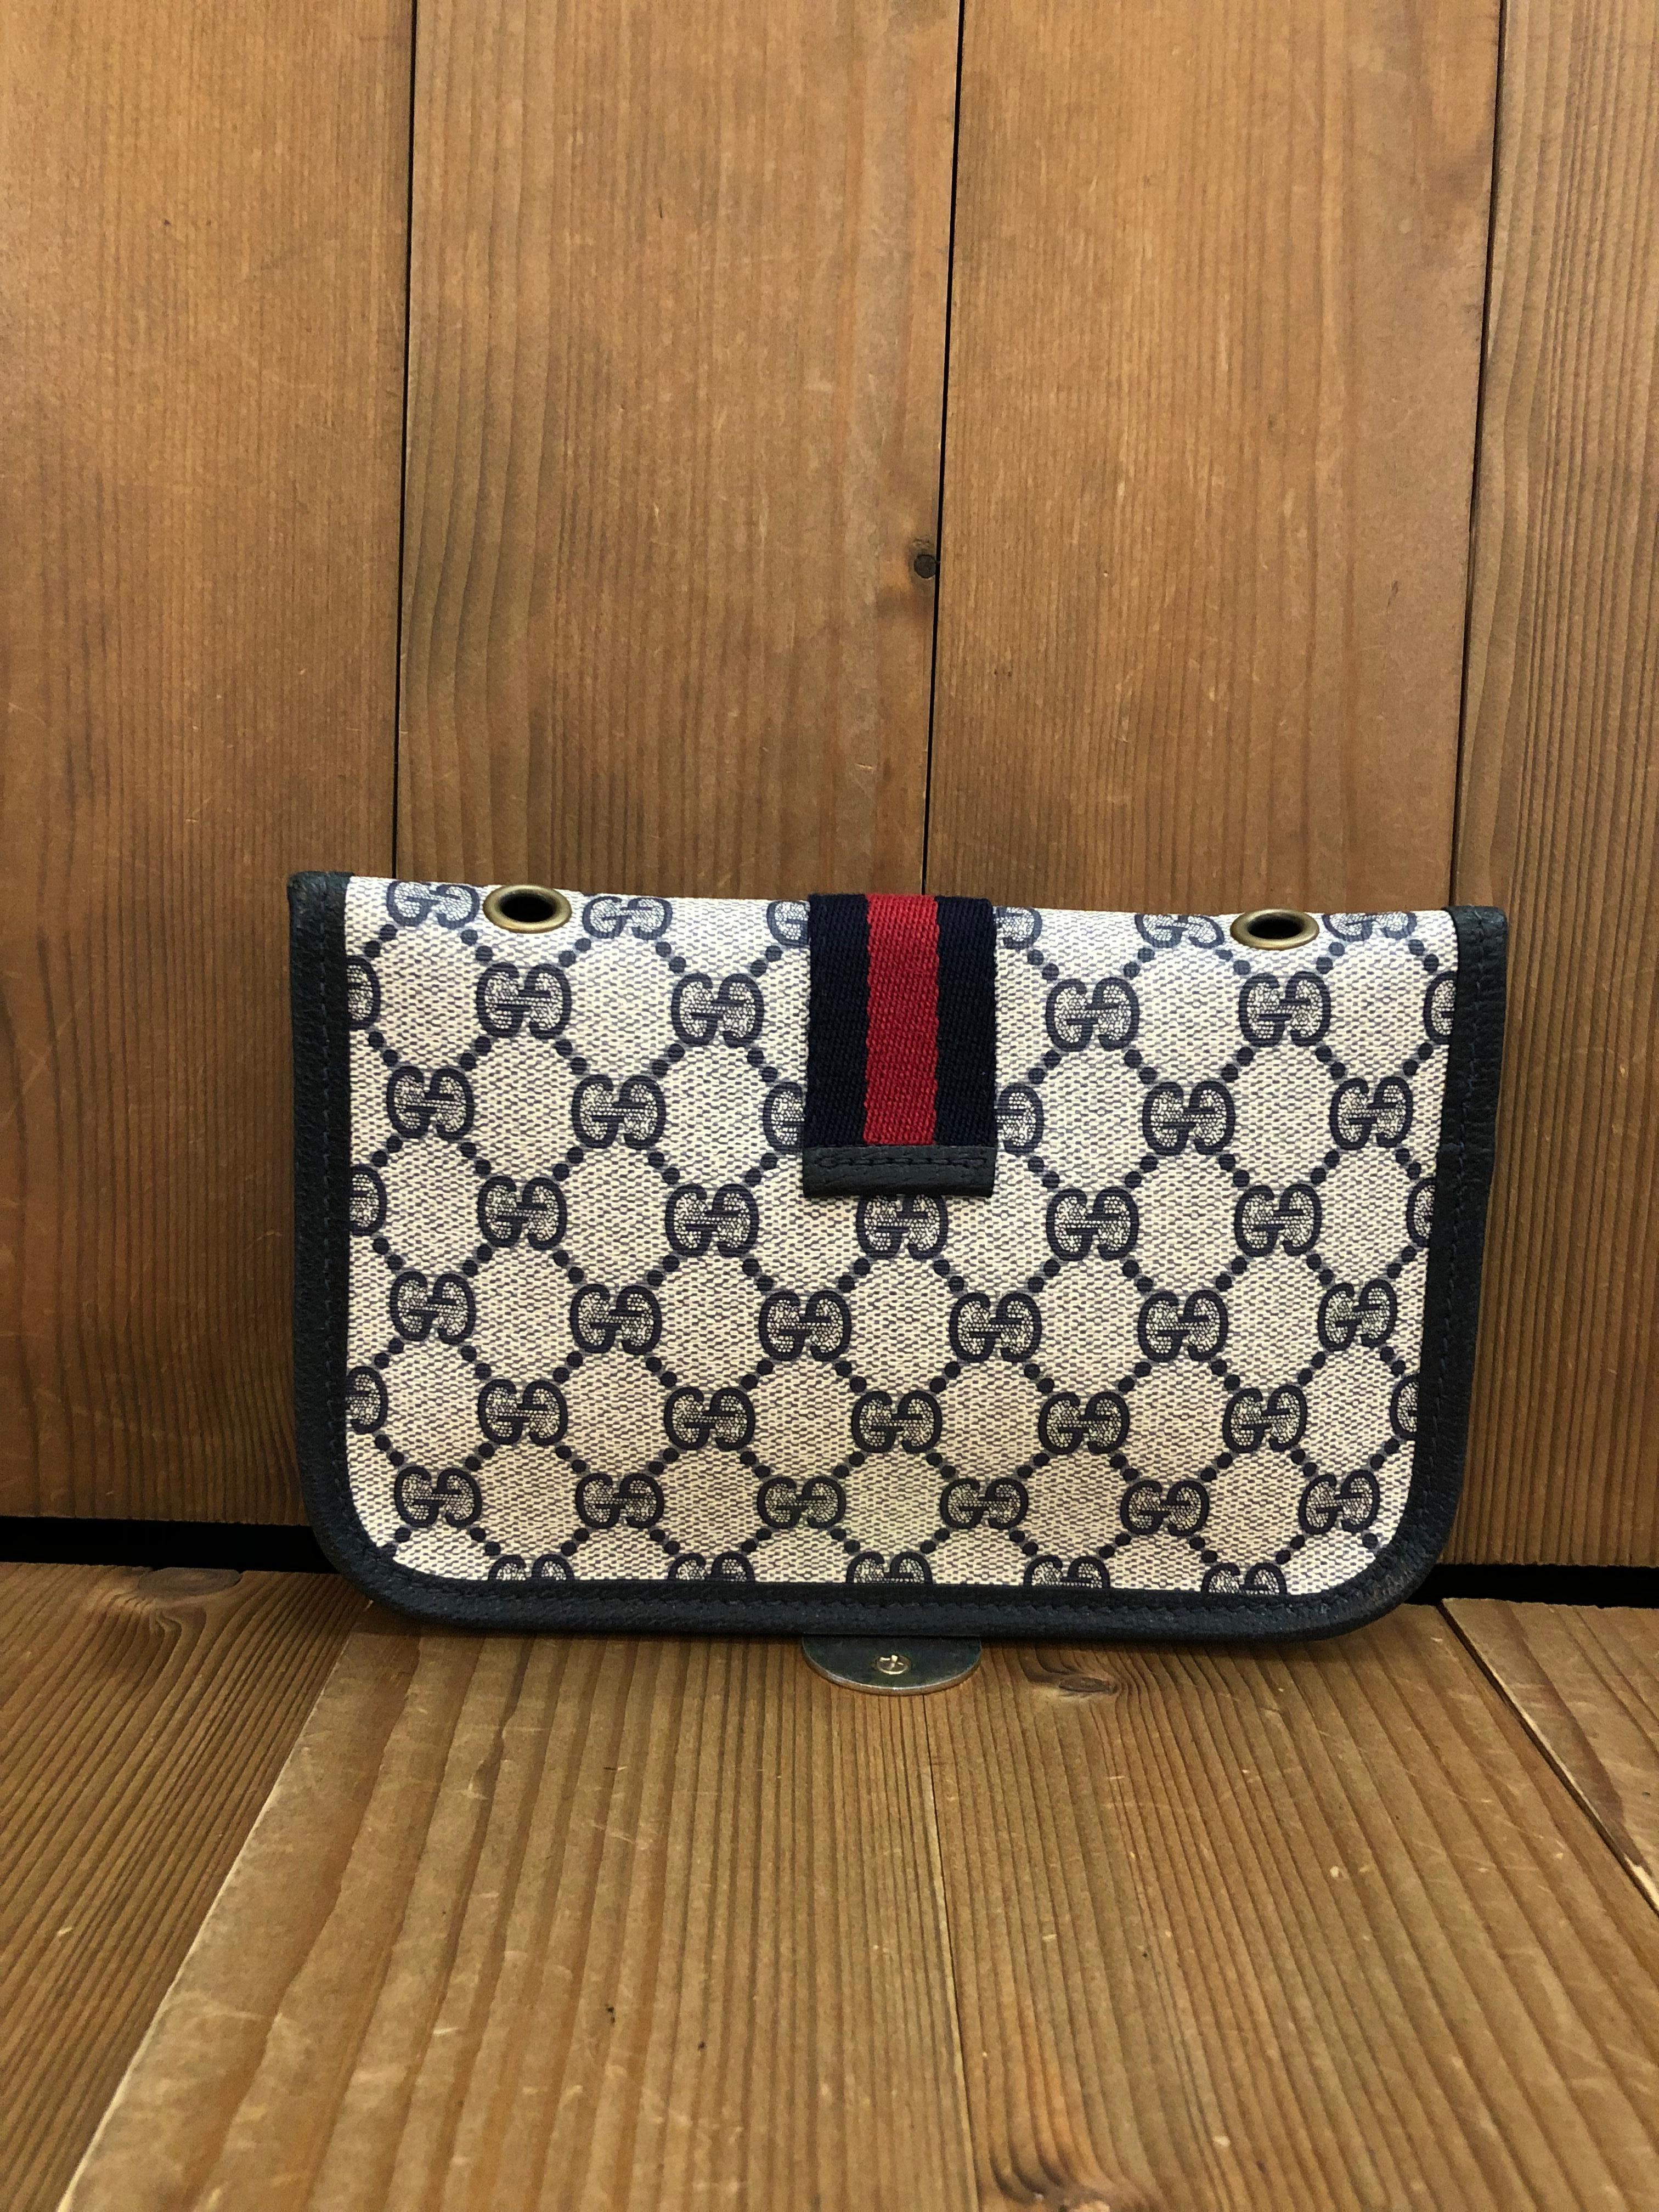 This vintage GUCCI pouch bag is crafted of GG monogram canvas in navy trimmed with navy leather. Front snap closure open to an un-lined canvas interior. Made in Italy. Measures 7.5 x 5 x 0.5 inches. This pouch has been altered by adding third party